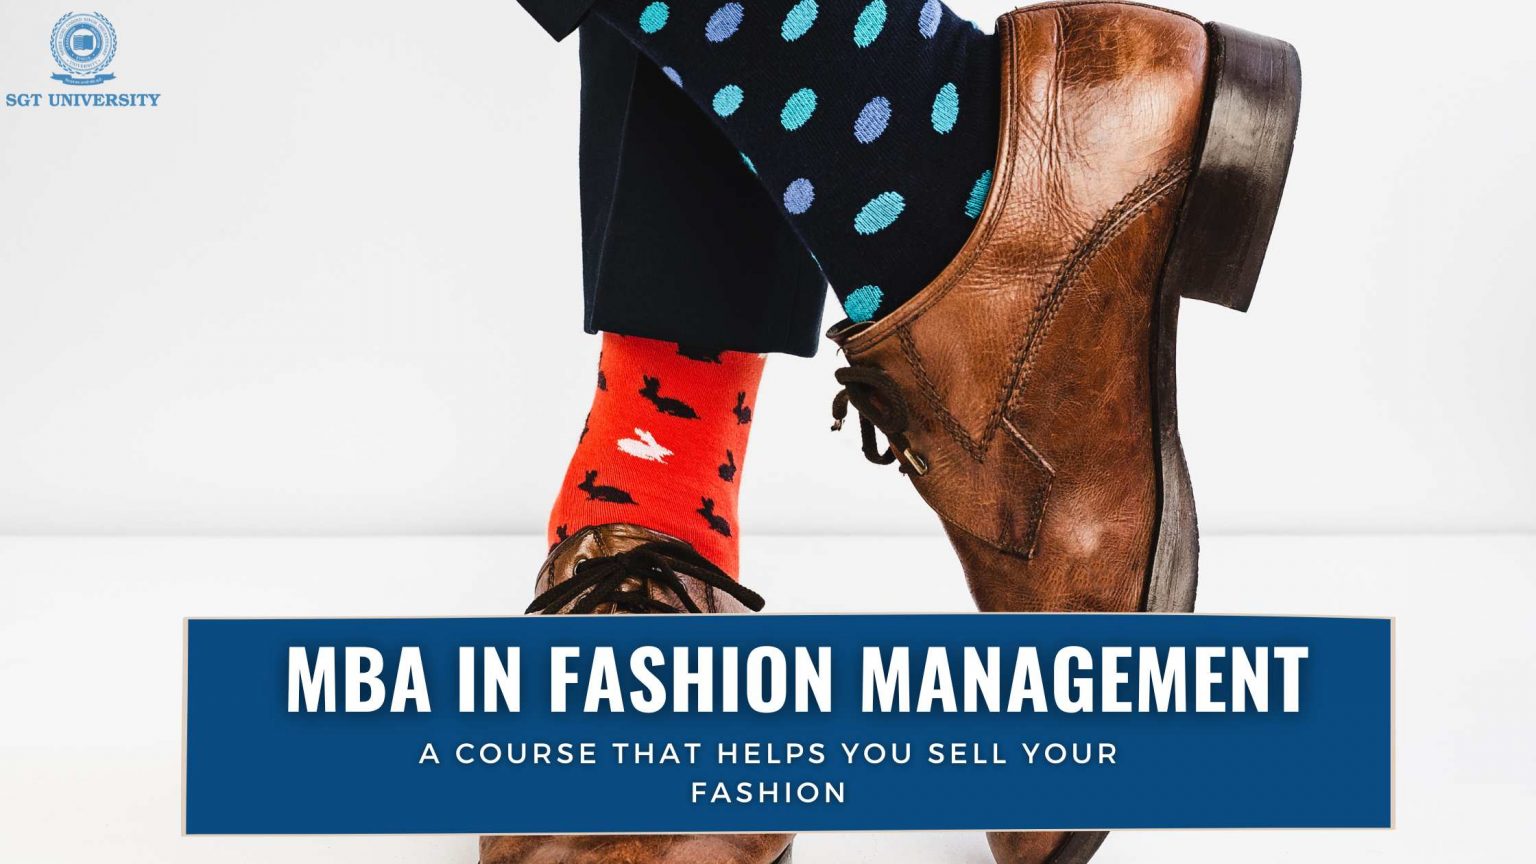 MBA (Fashion Management): A Course That Helps You Sell Your Fashion